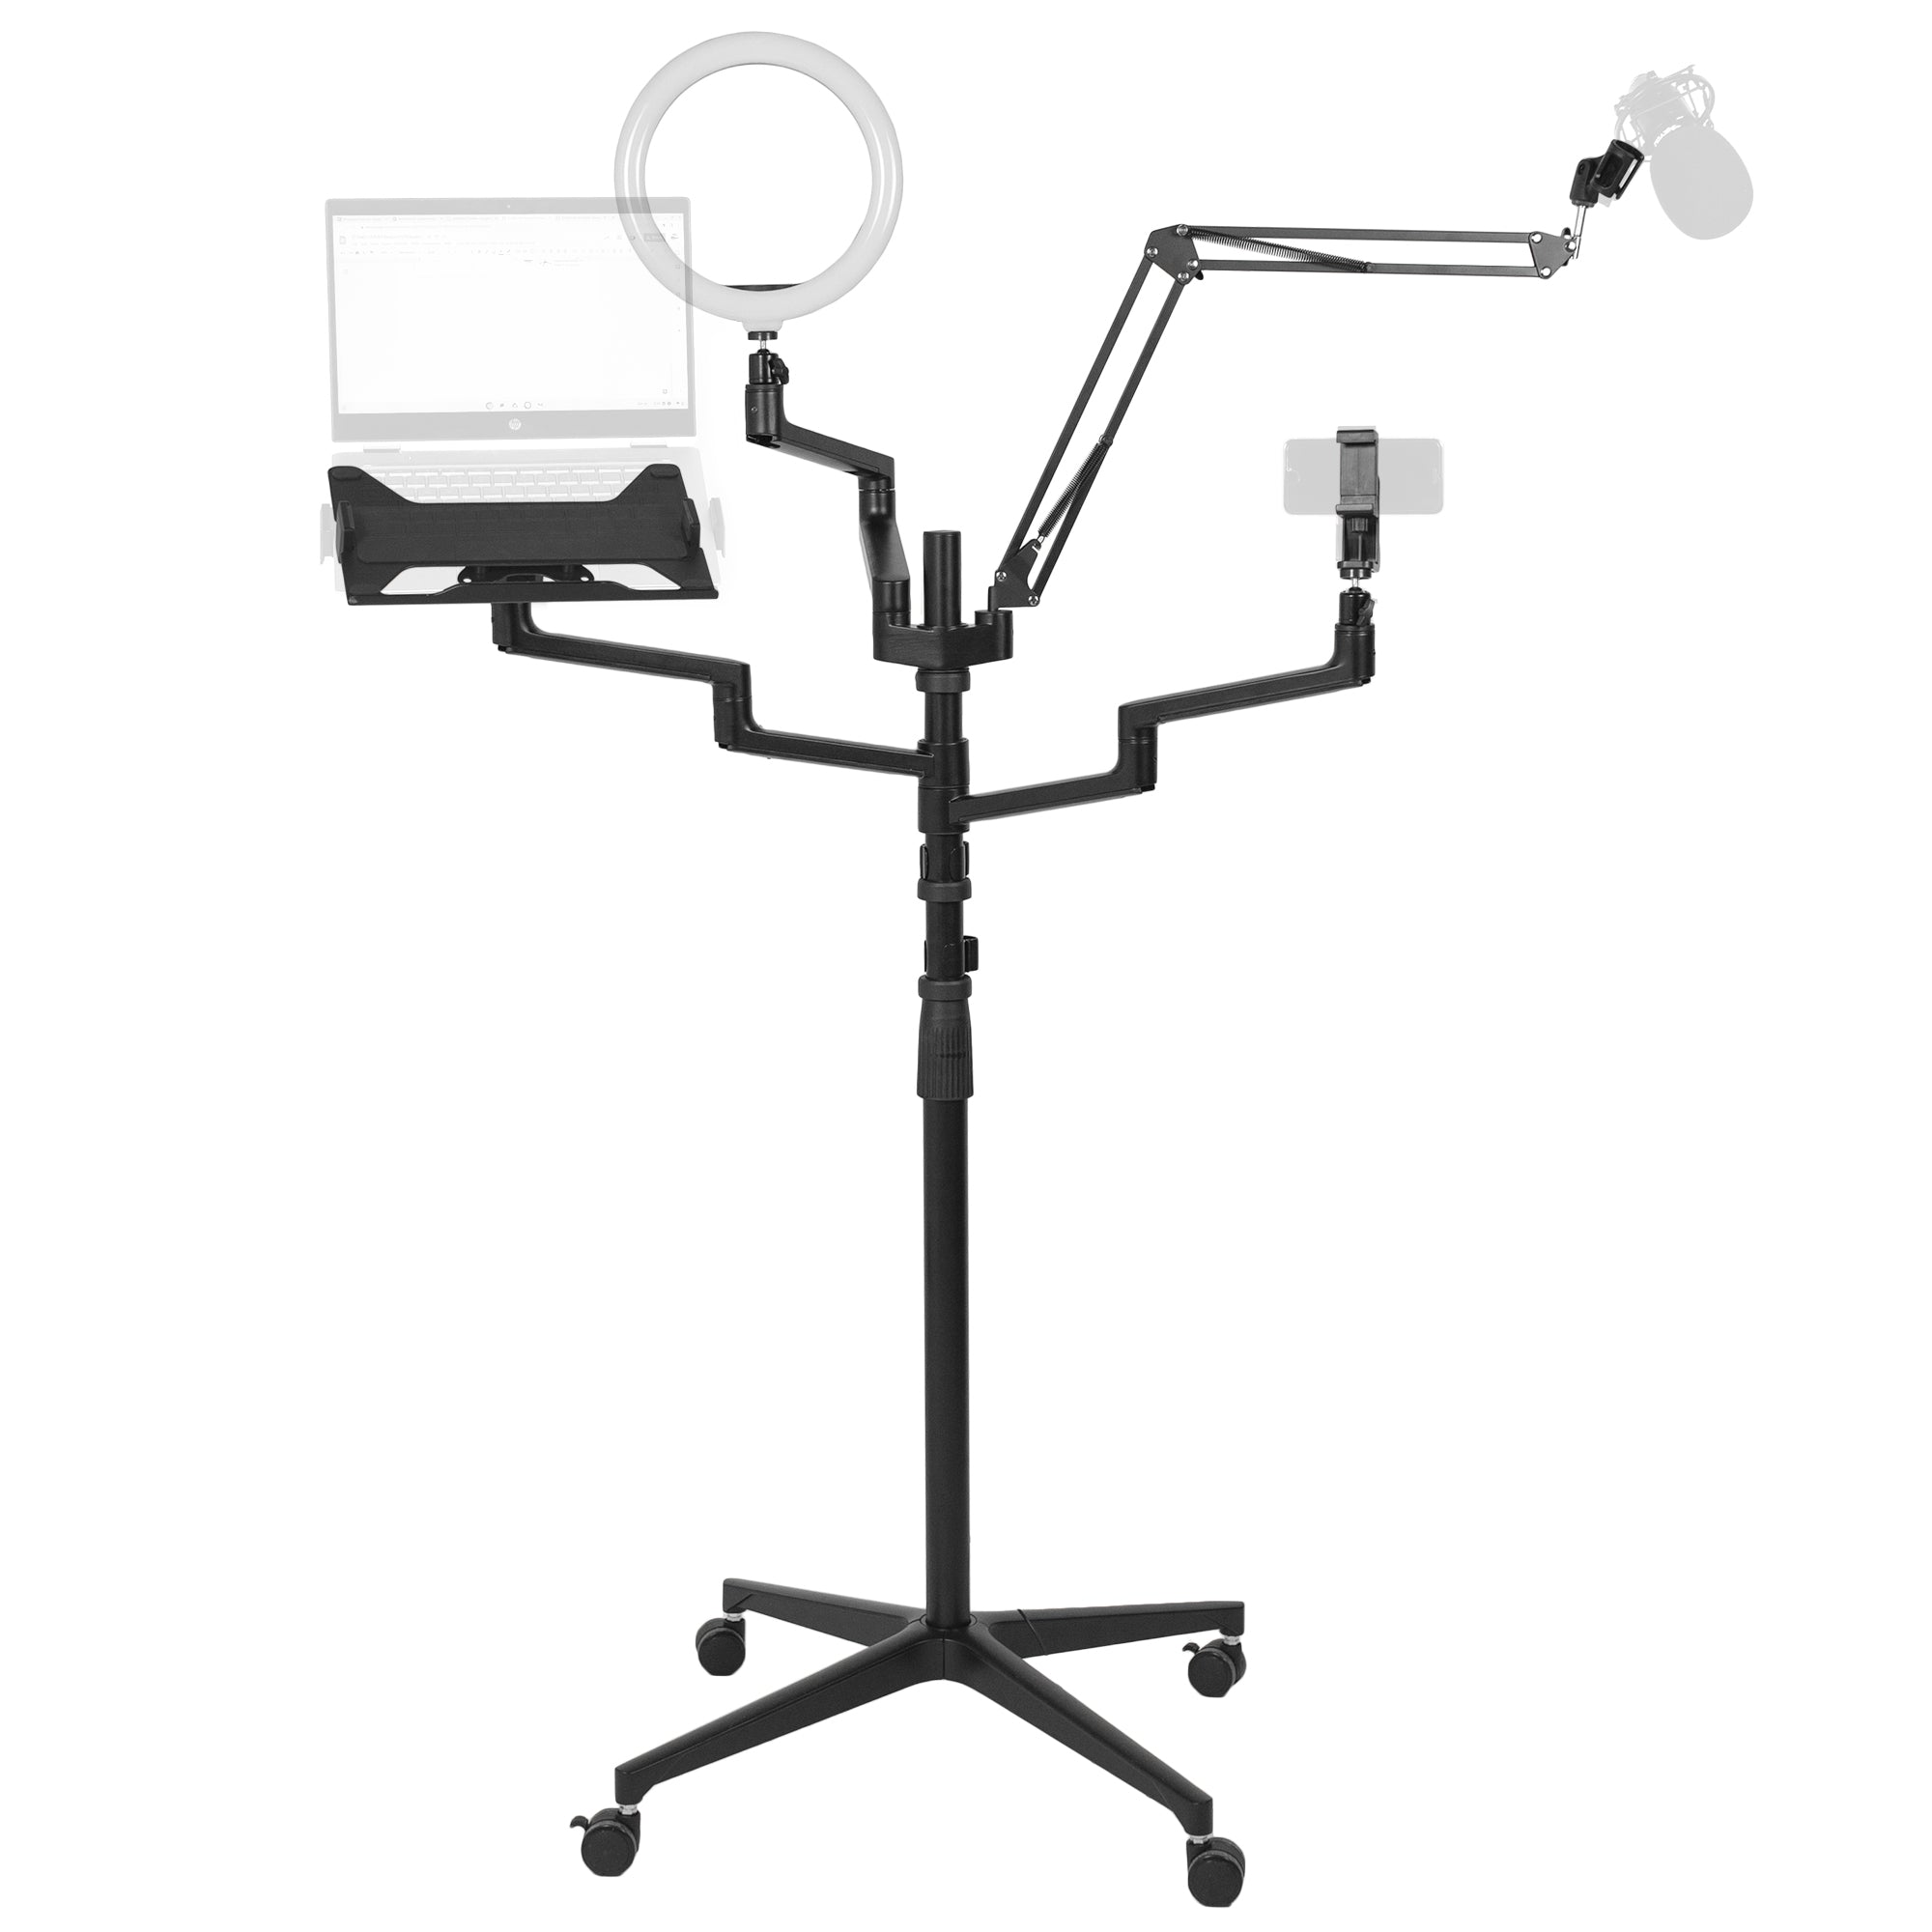 Mobile All-In-One Livestream Multi-Mount Floor Stand